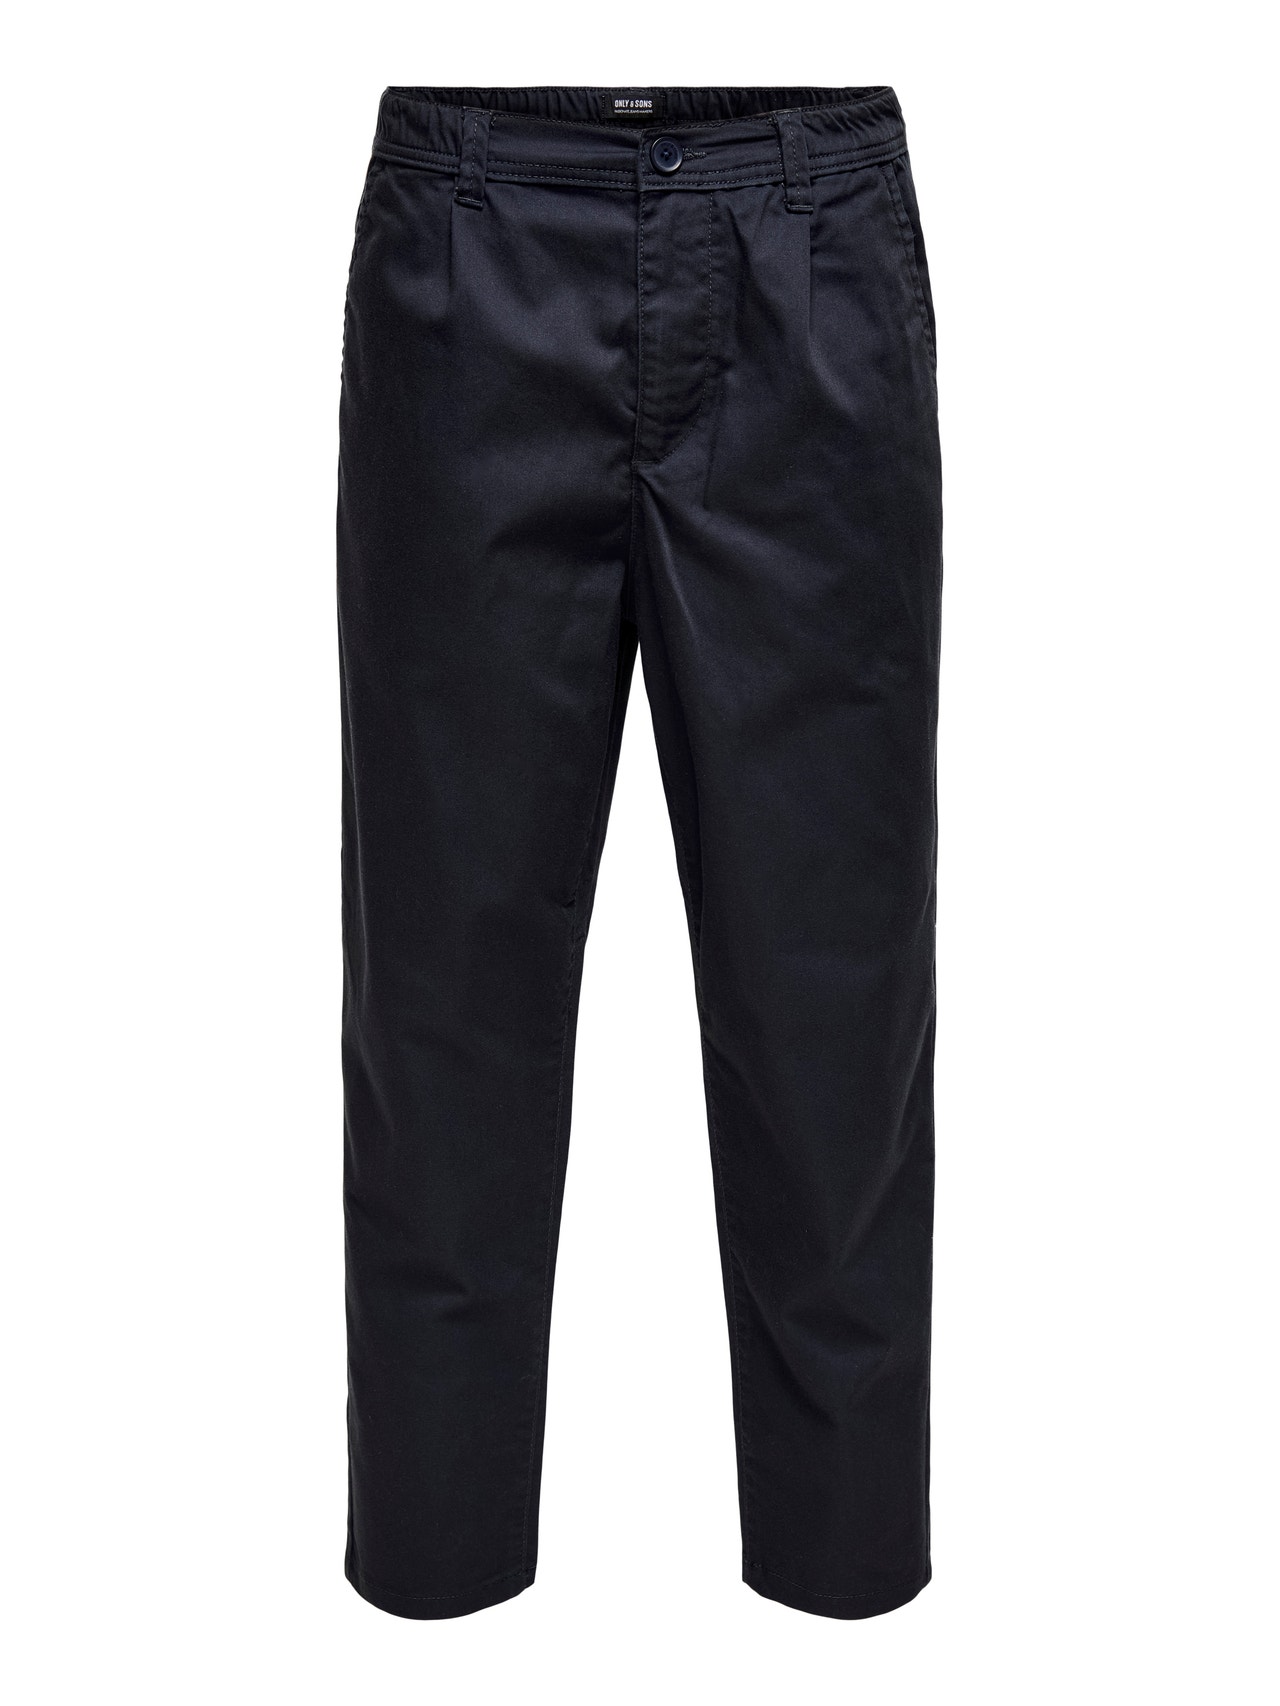 ONLY & SONS ONSDEW CHINO TAPERED PK 1486 NOOS -Dark Navy - 22021486